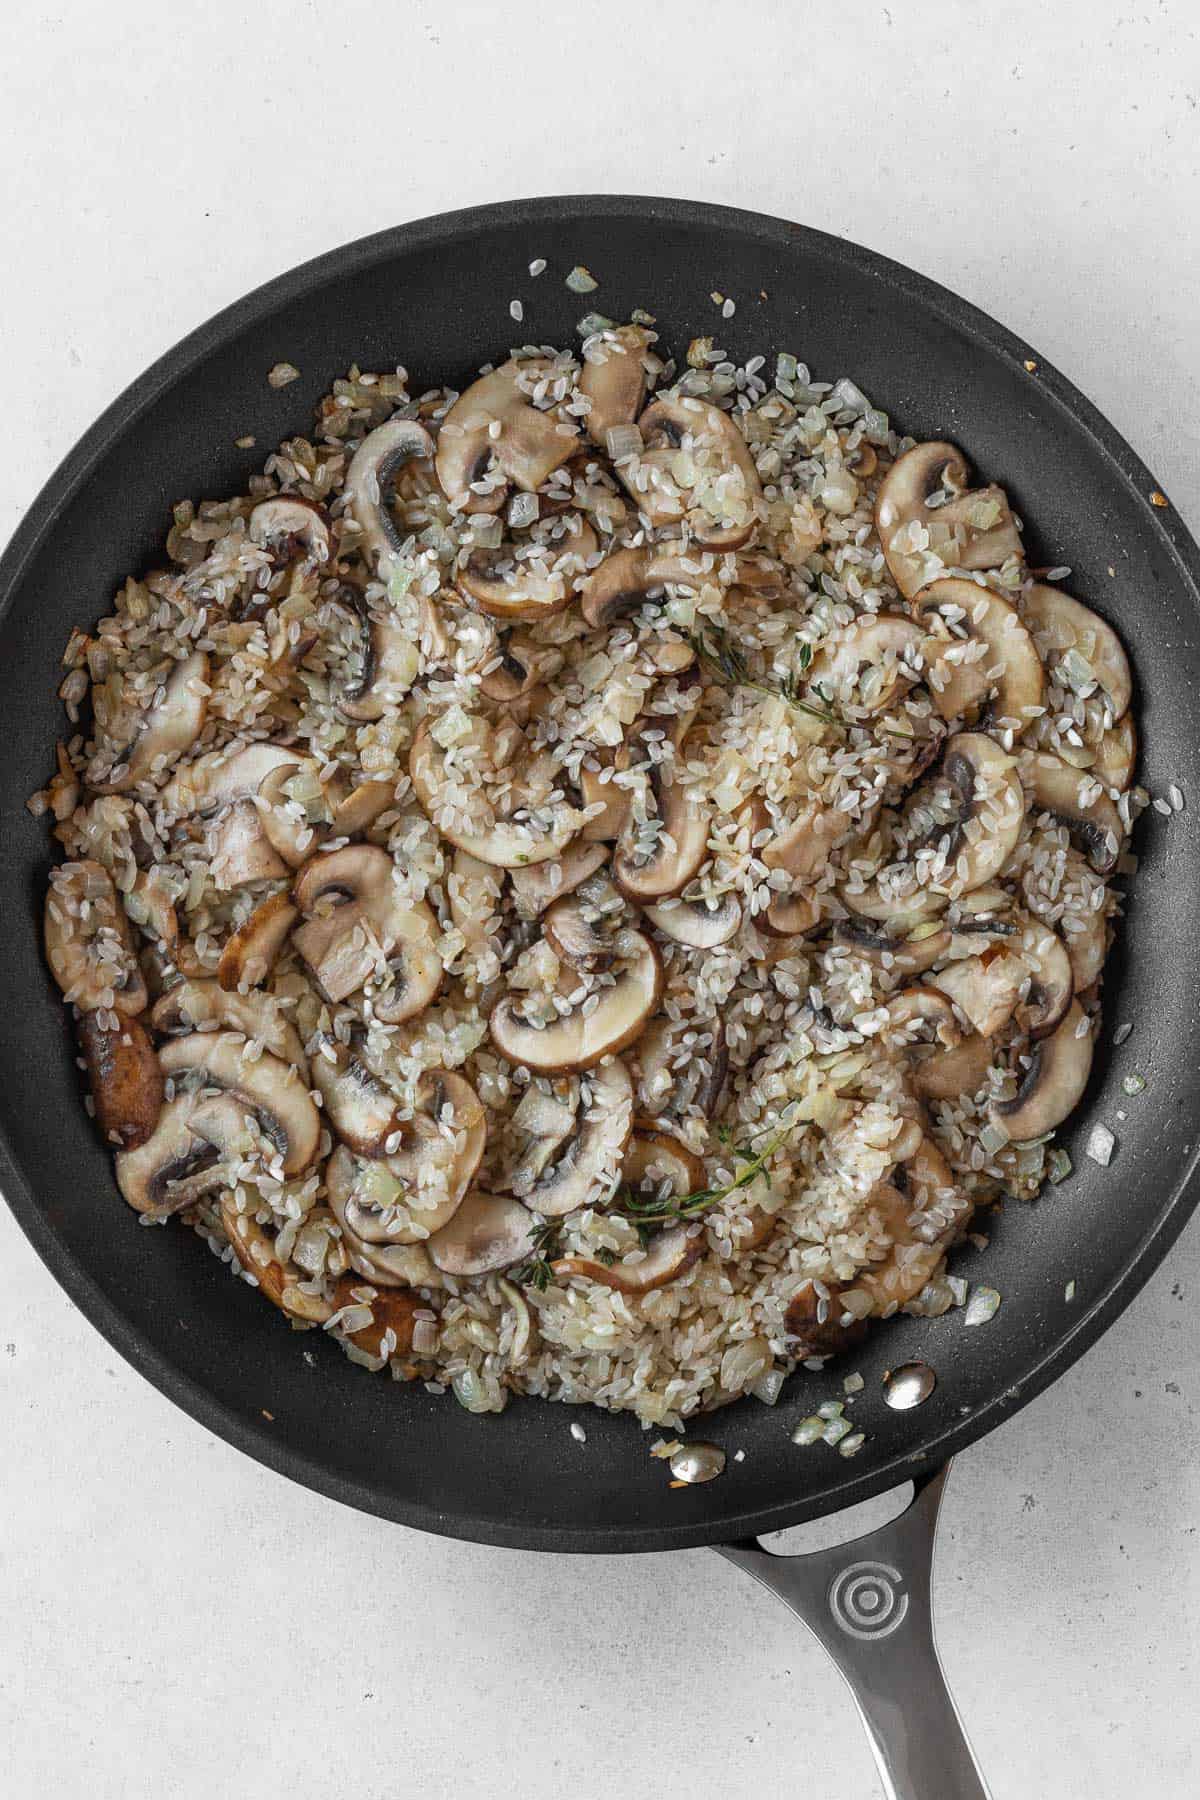 Onions, sliced mushrooms, and rice in a black pan.